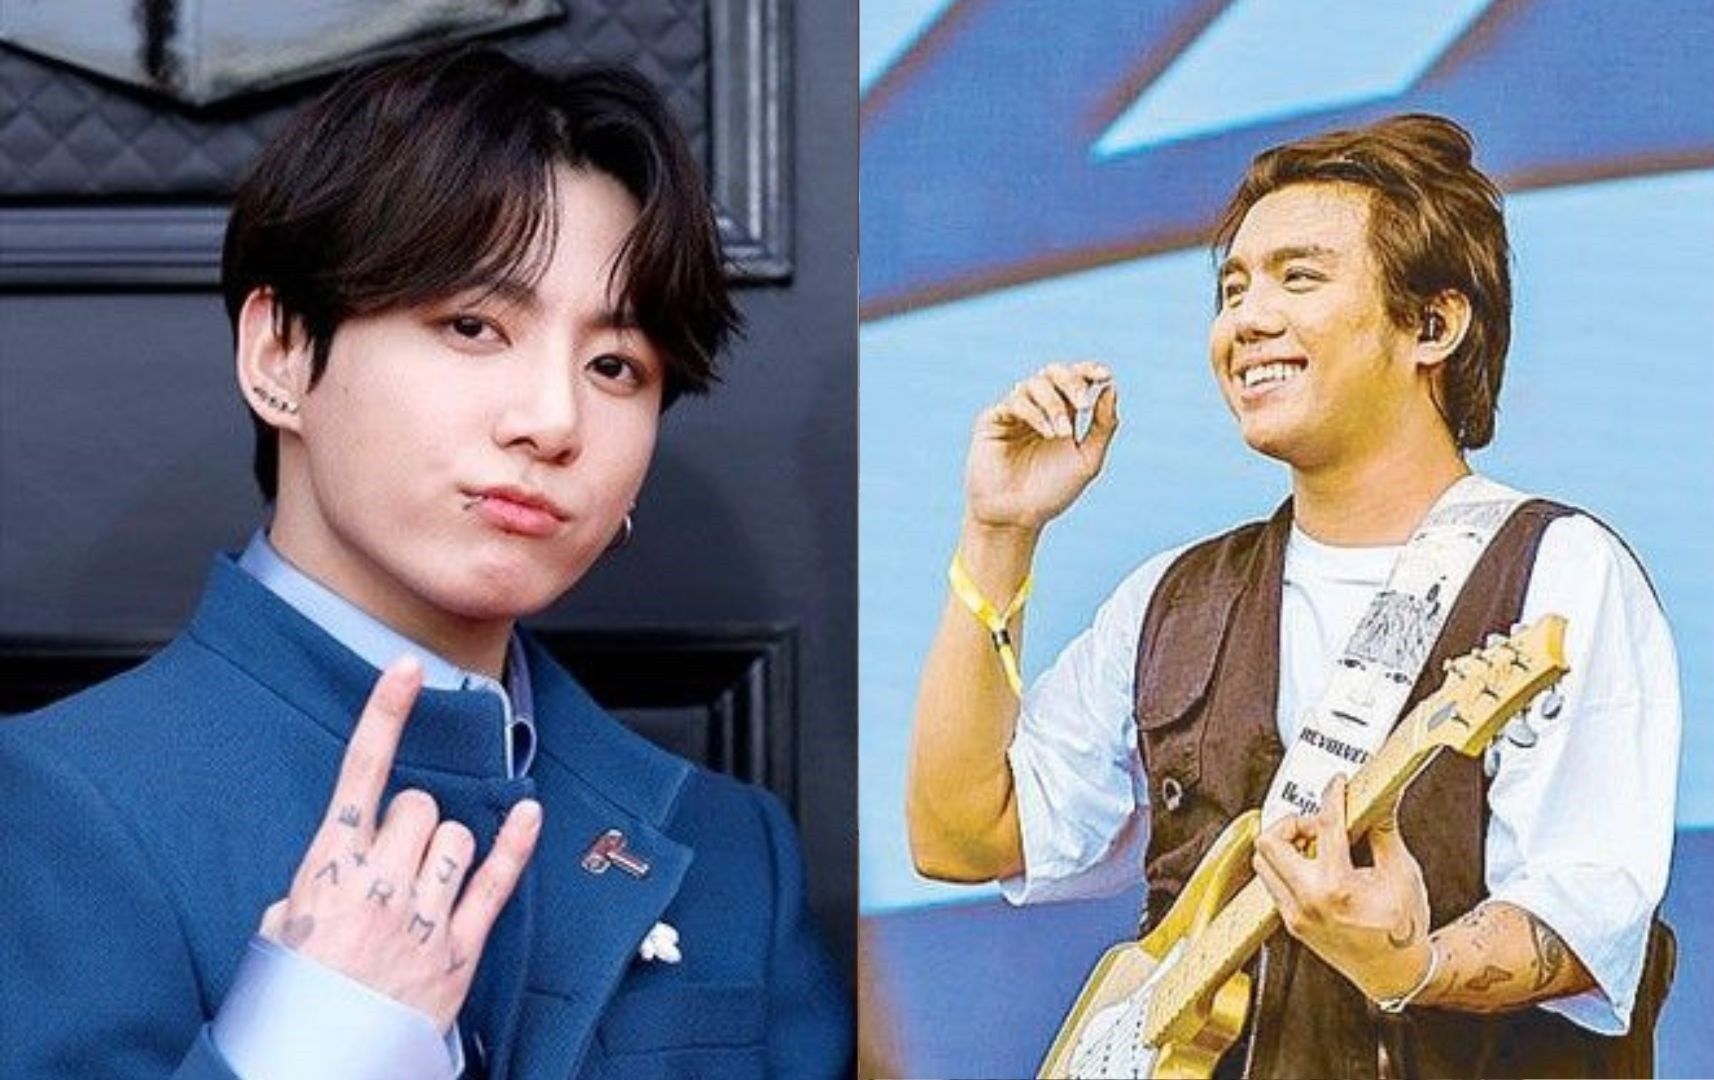 Zack Tabudlo reacts to BTS' Jungkook jamming to his song 'Give Me Your Forever'